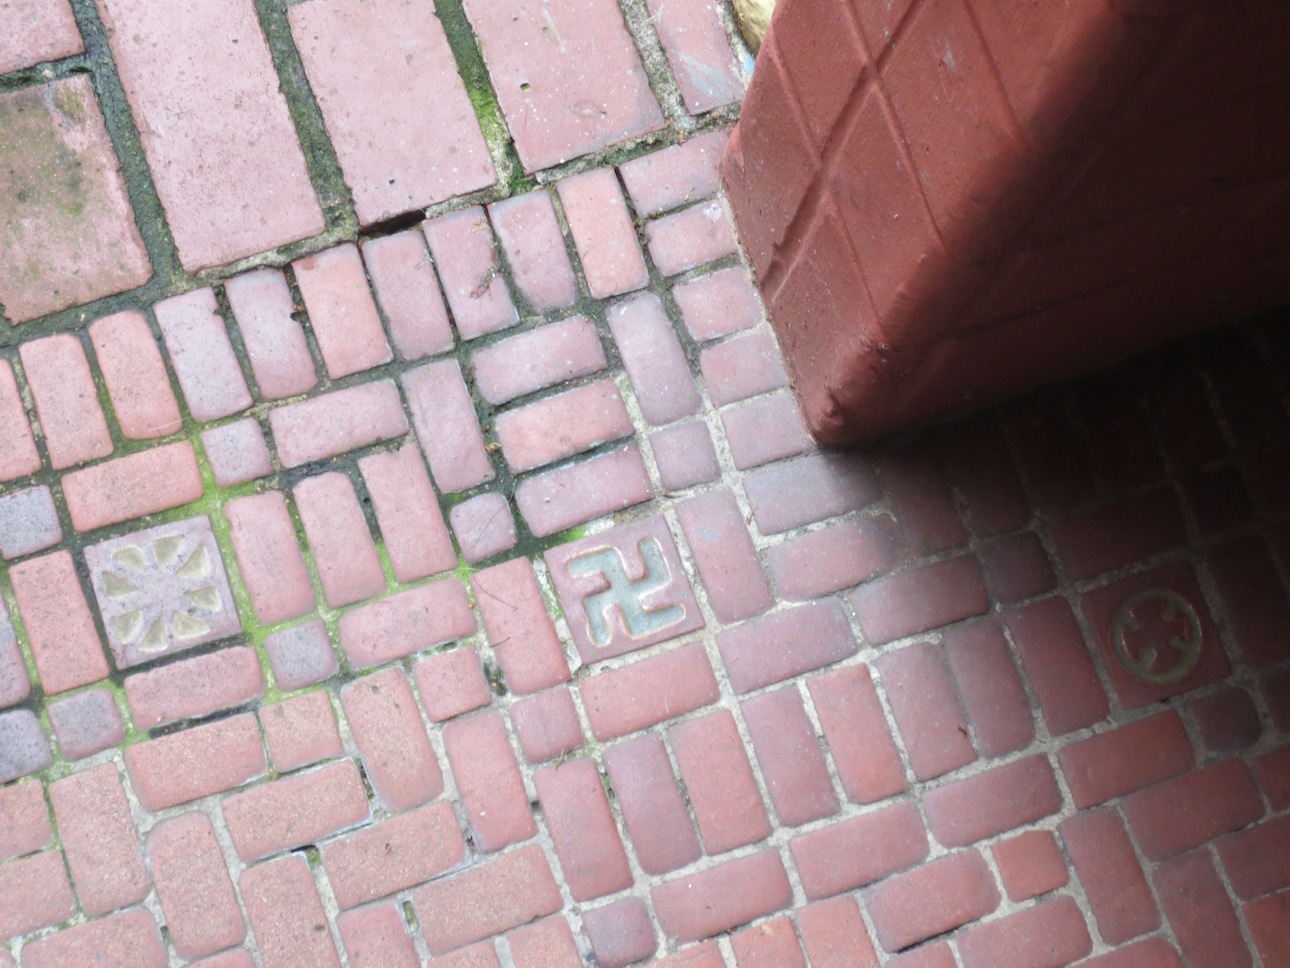 Weird swastika signs in the building tiles where I stayed.